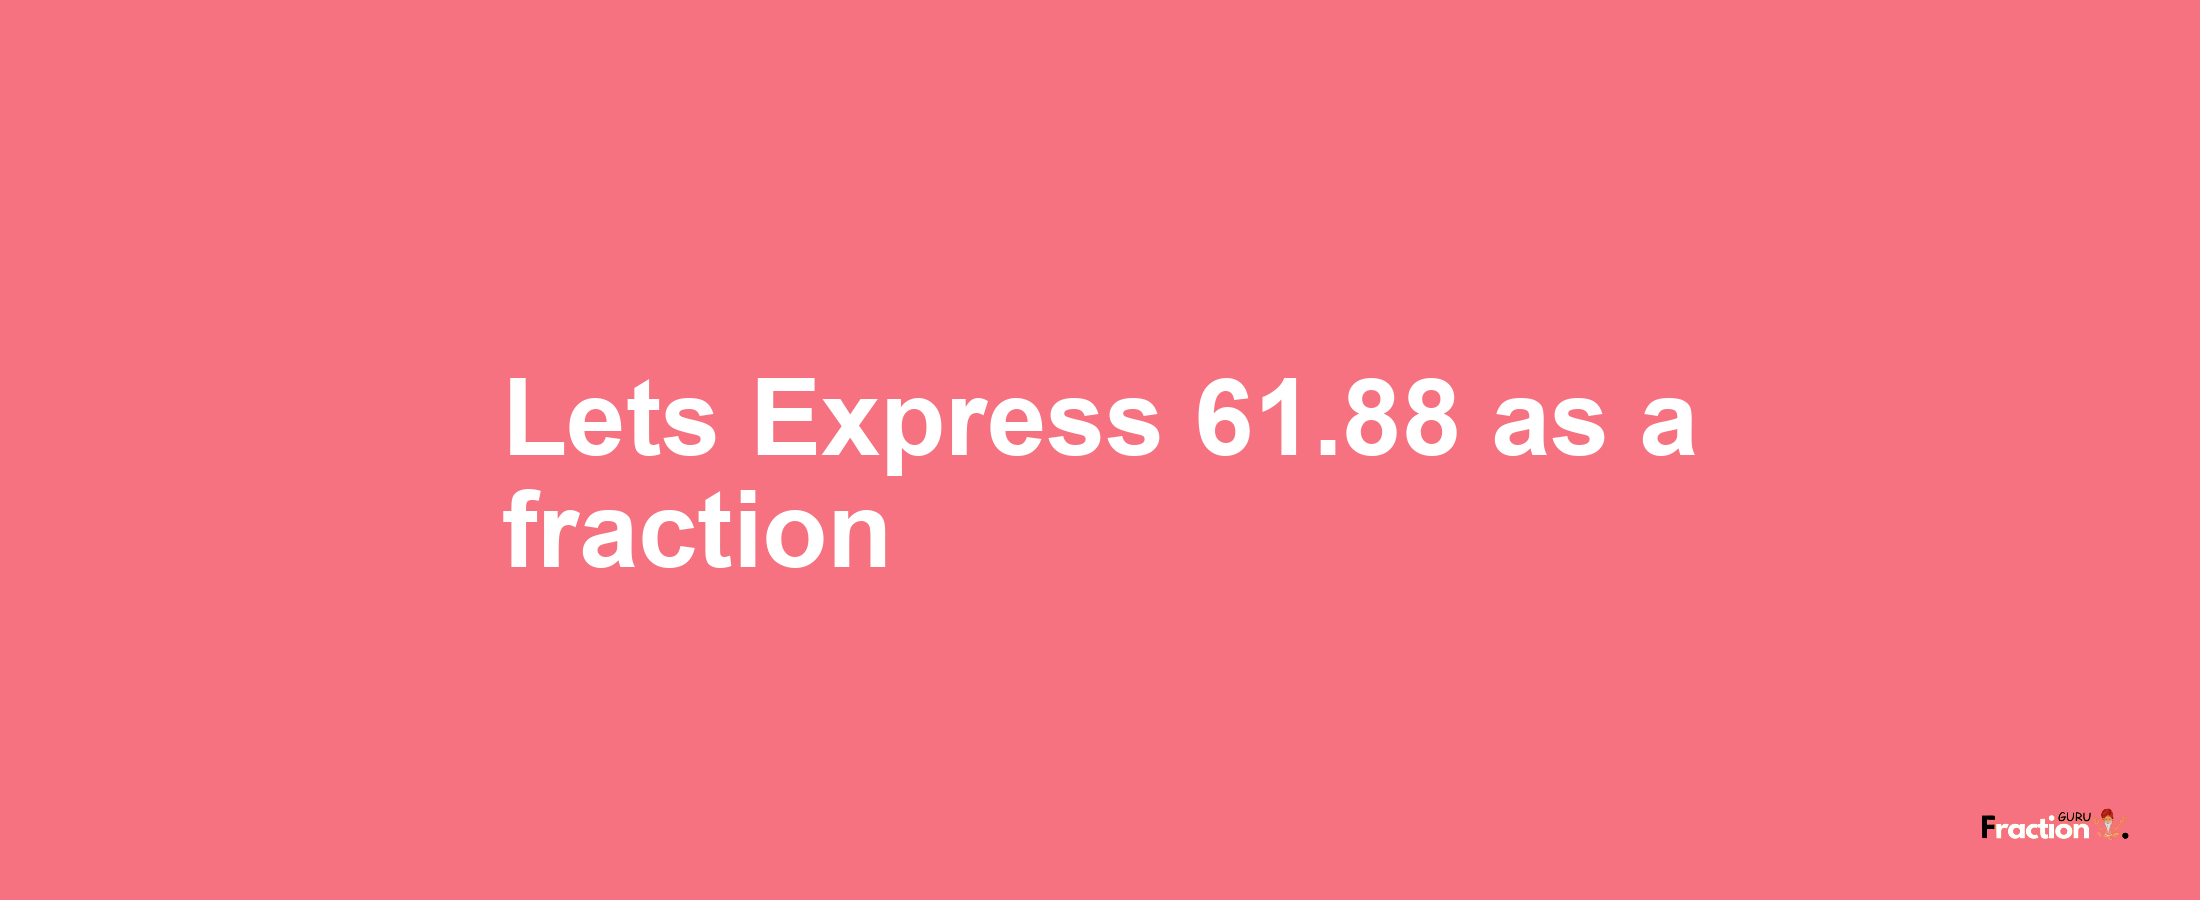 Lets Express 61.88 as afraction